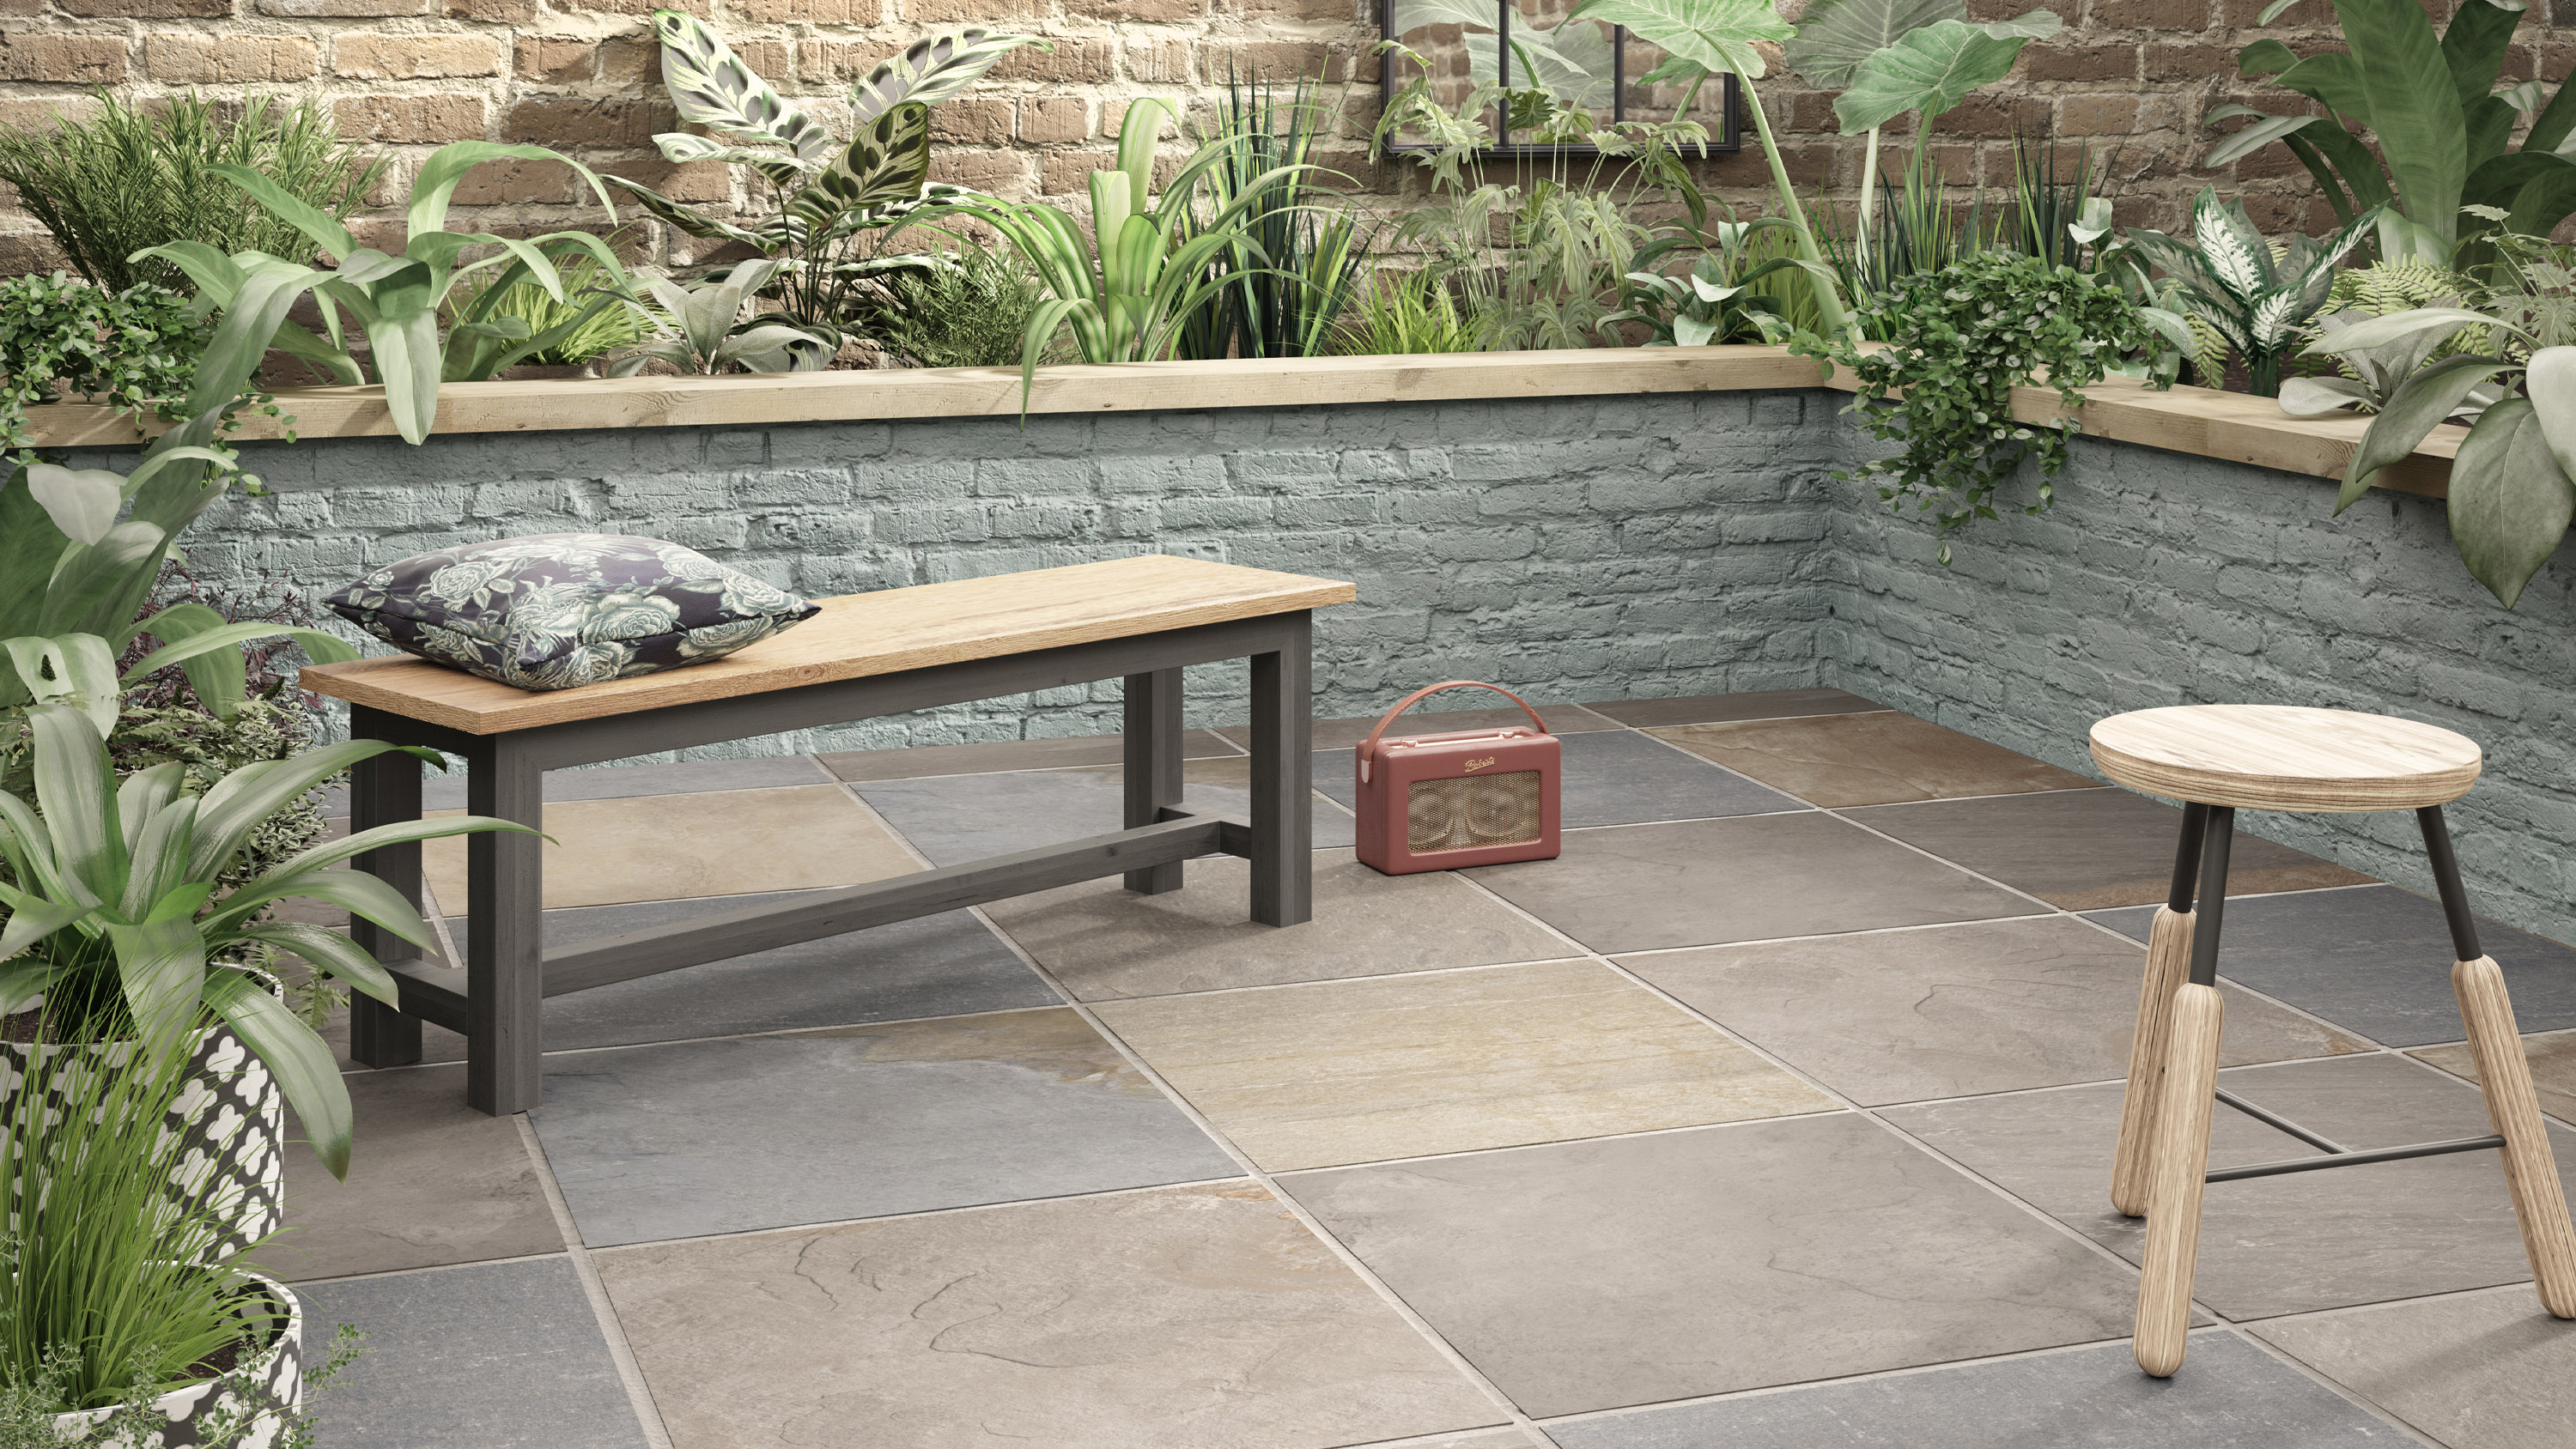 How To Lay Porcelain Tiles Outside, How To Tile Outdoor Patio